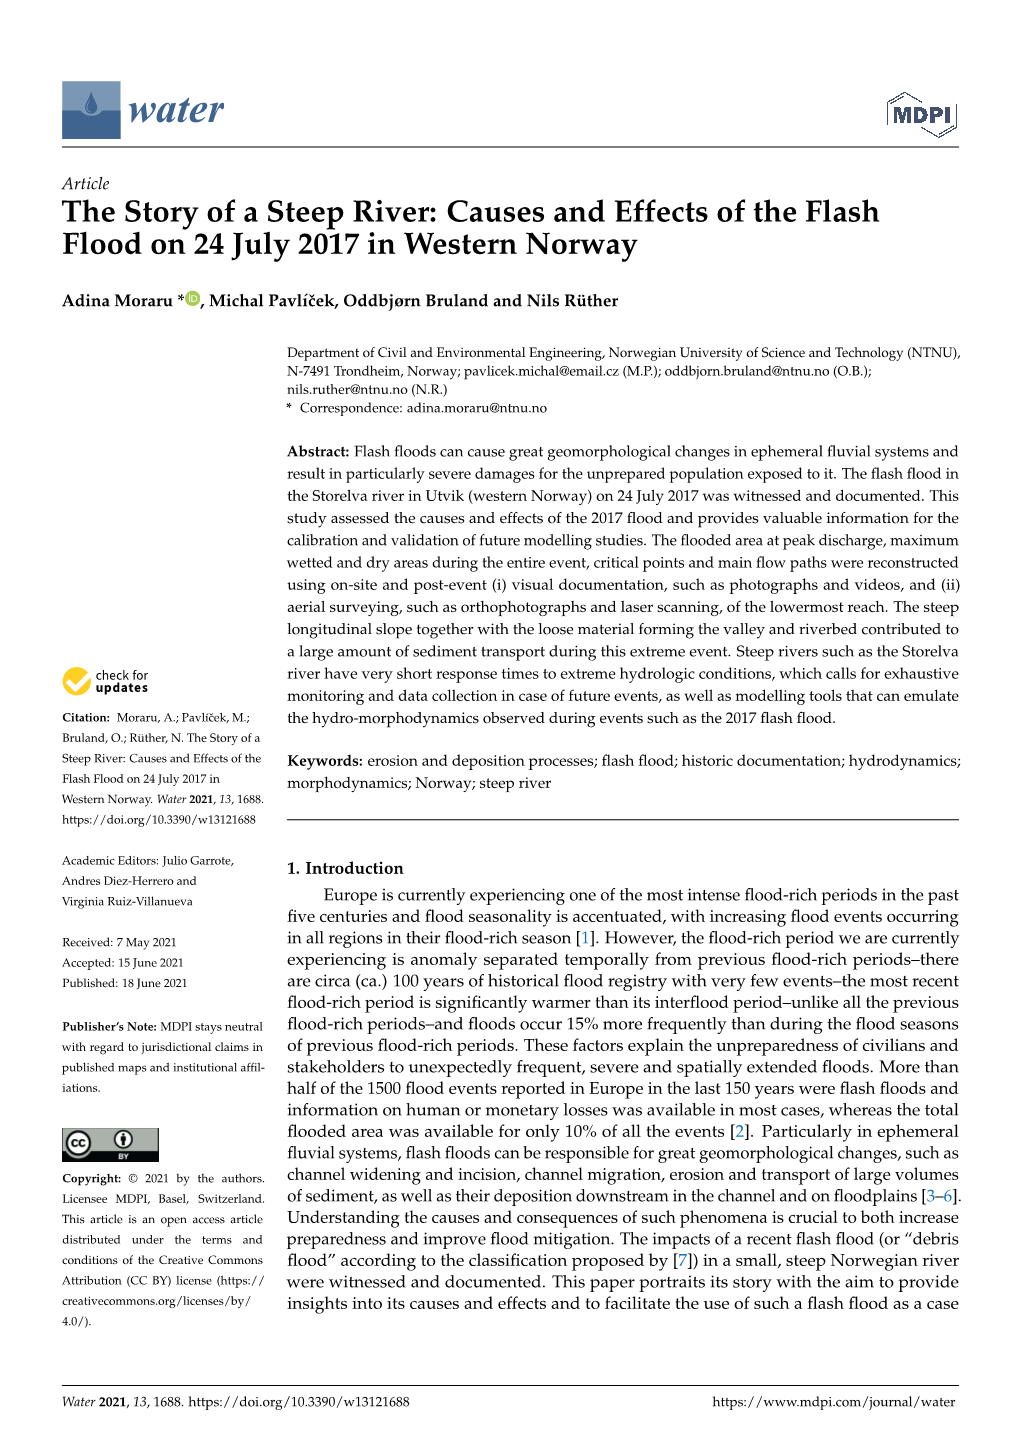 The Story of a Steep River: Causes and Effects of the Flash Flood on 24 July 2017 in Western Norway